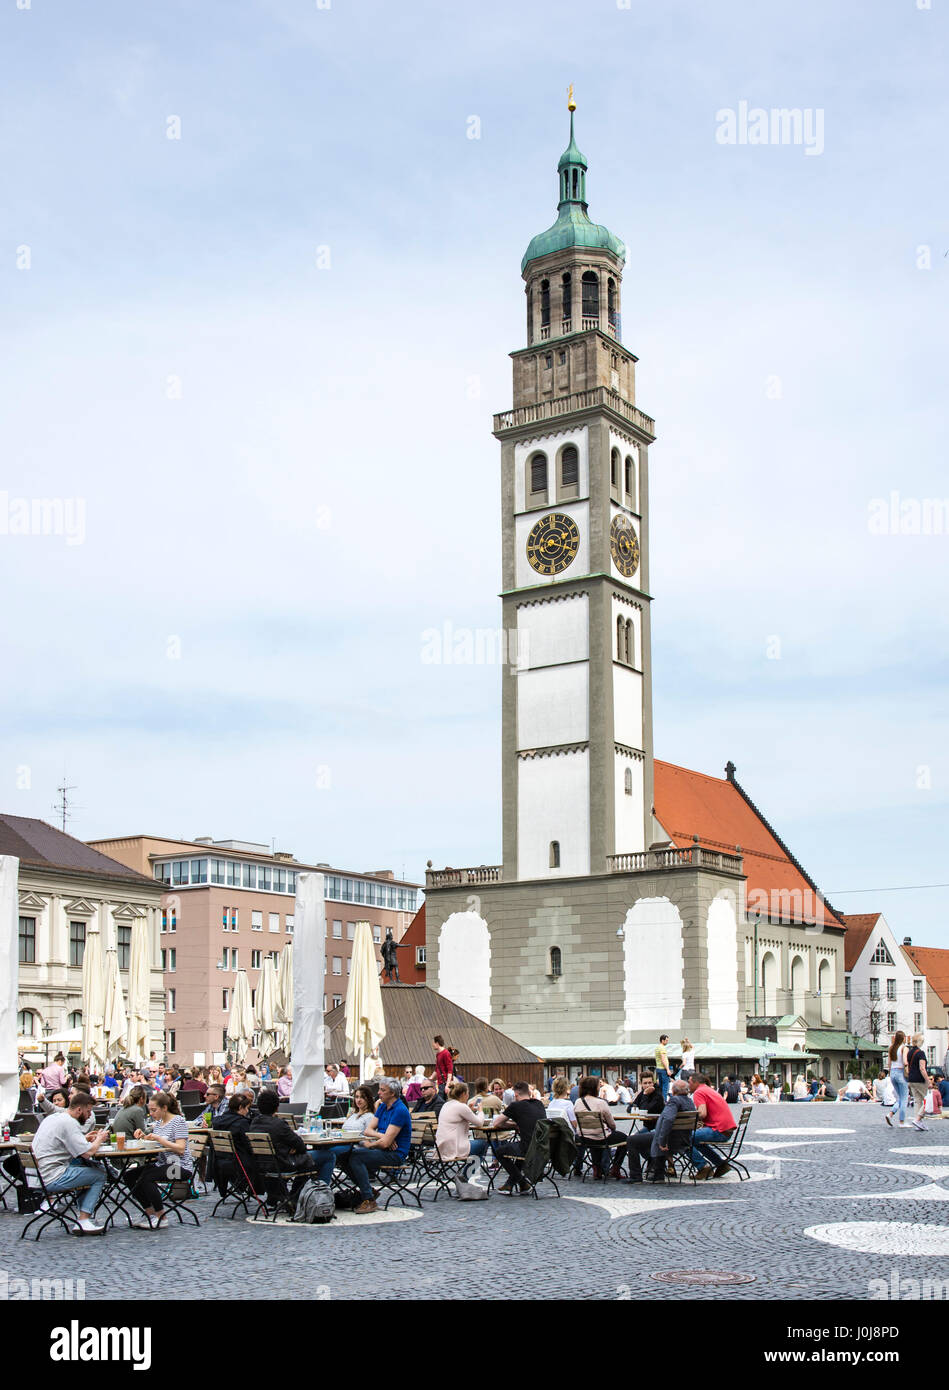 AUGSBURG, GERMANY - APRIL 1: Tourits at a street cafe  in Augsburg, Germany on April 1, 2017. Augsburg is one of the oldest cities of Germany. Foto ta Stock Photo